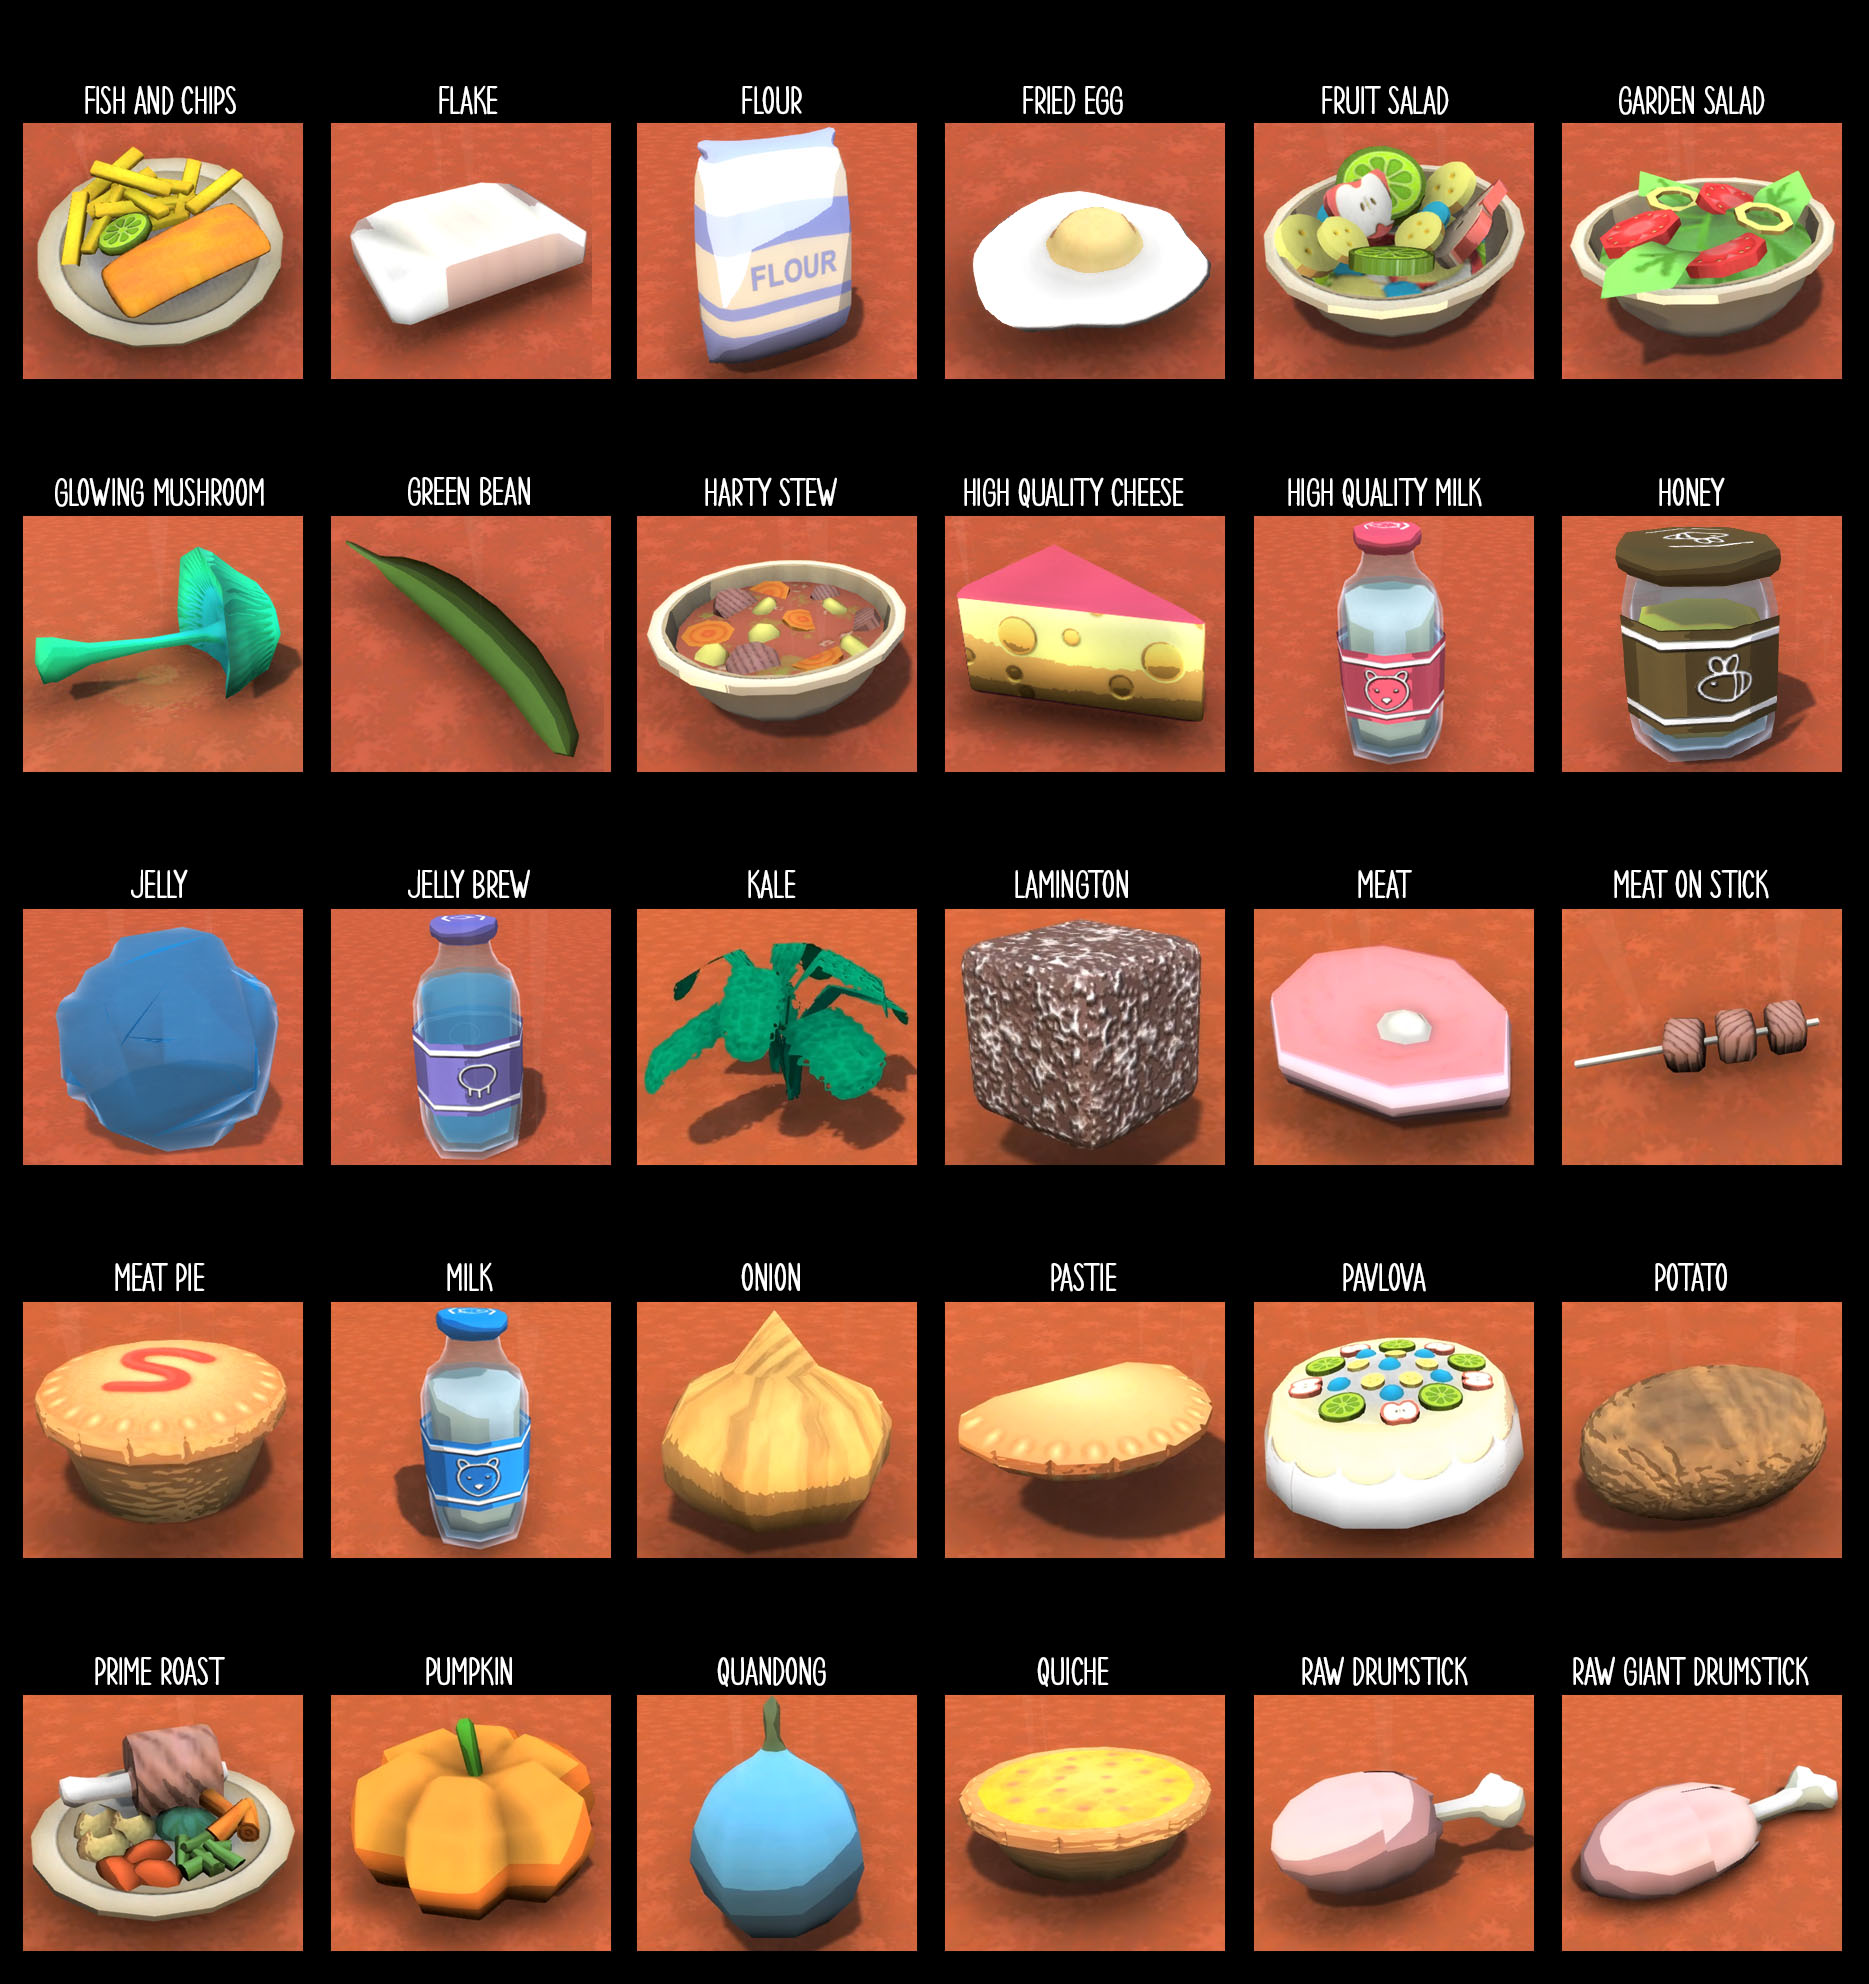 Dinkum - Complete Catalog With Pictures - Food - 9B70B4F